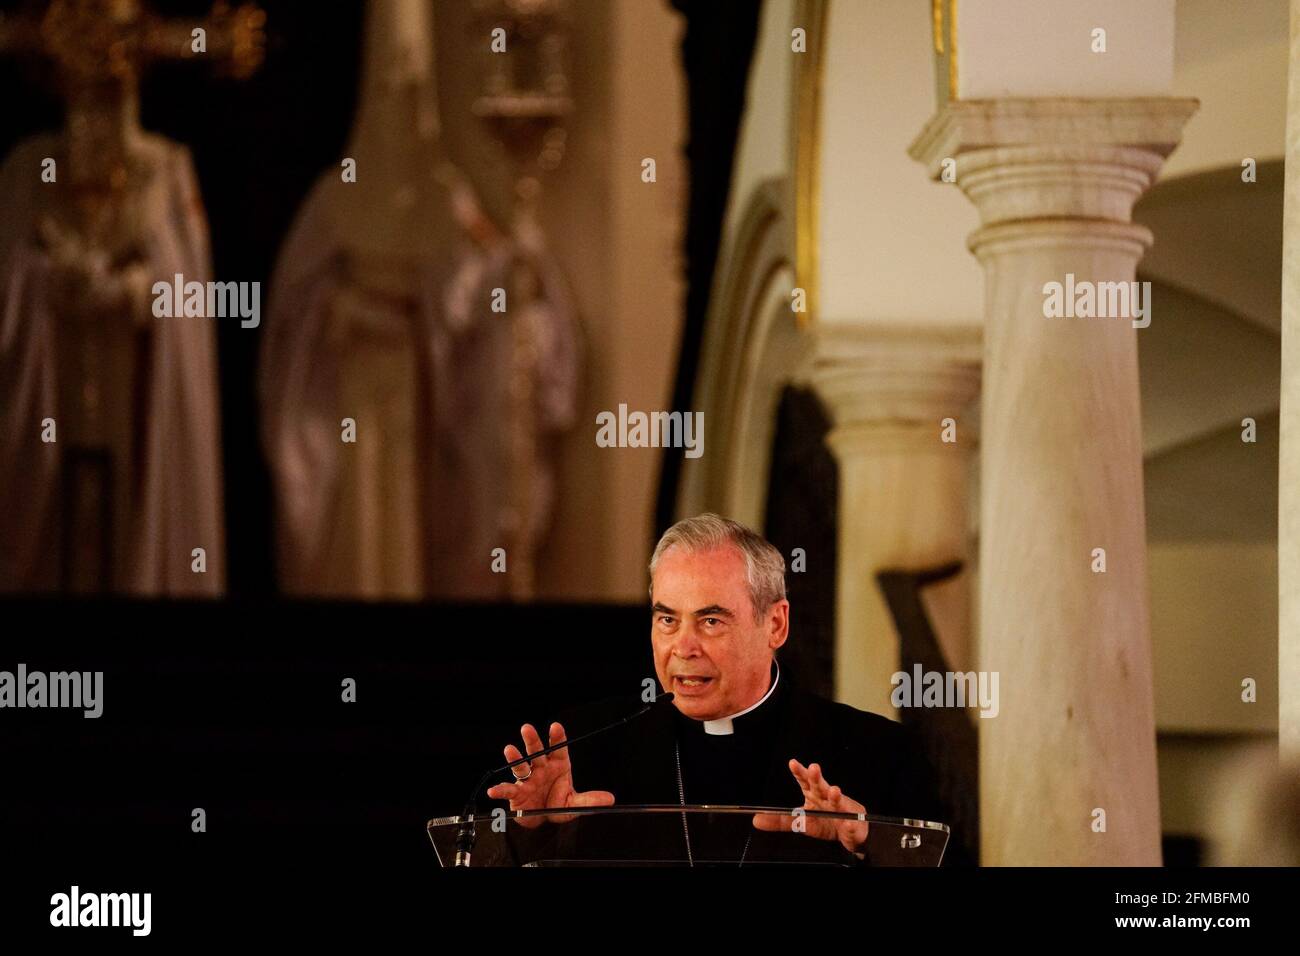 Malaga, Spain. 07th May, 2021. Malaga Bishop, Jesus Catala Ibañez seen speaking during the exhibition at Centro Cultural Fundacion Unicaja.'Un siglo de esplendor' is an exhibition that shows the artistic heritage of the Holy Week brotherhoods of Malaga and is one of the events organized by Agrupacion de Cofradias de Semana Santa de Malaga for the centenary of the institution. Credit: SOPA Images Limited/Alamy Live News Stock Photo